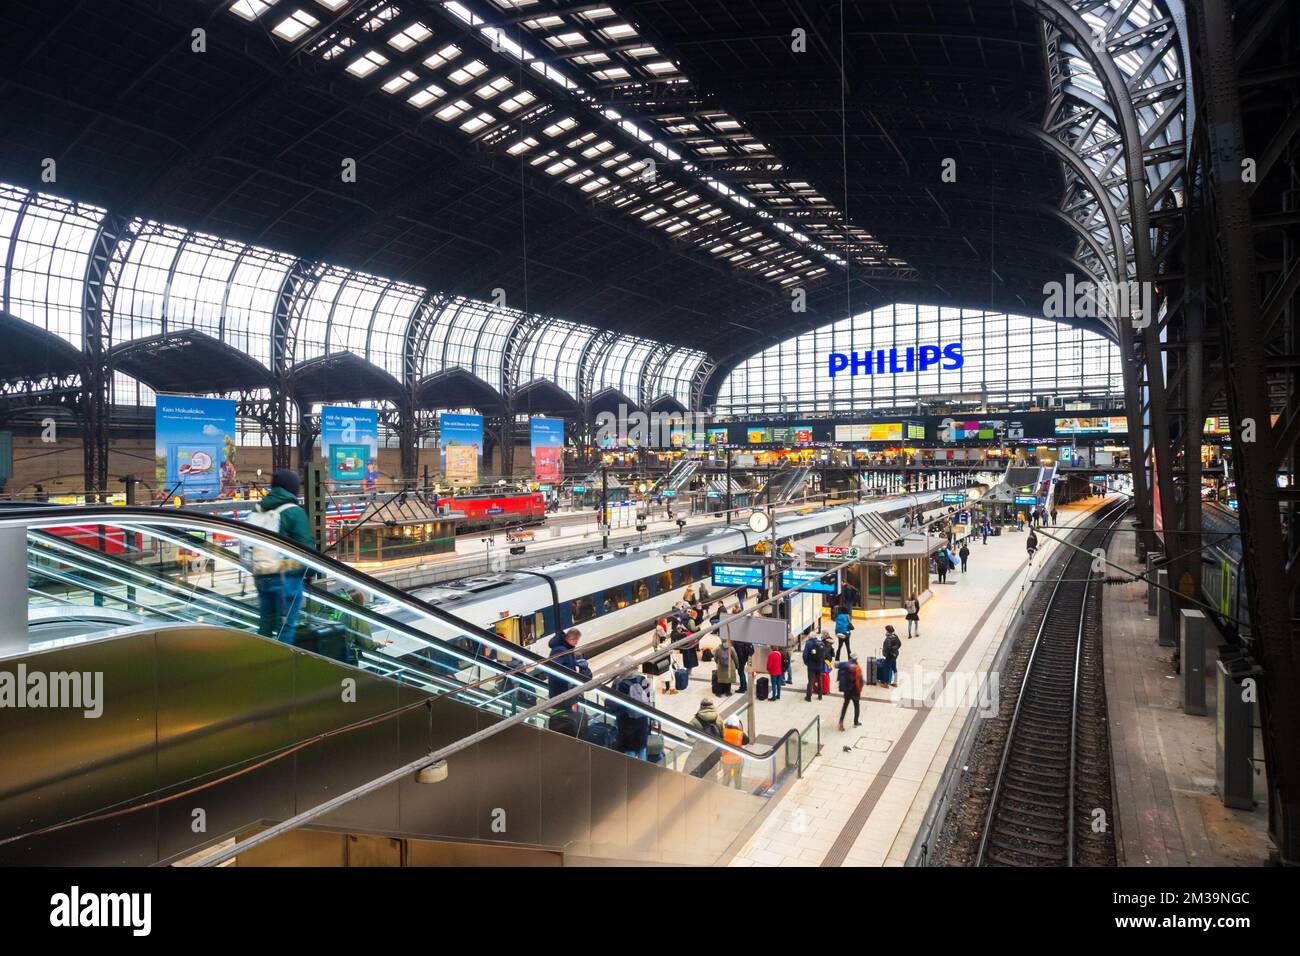 Hamburg Central Station (Hauptbahnhof), view of station concourse and tracks, Germany Stock Photo